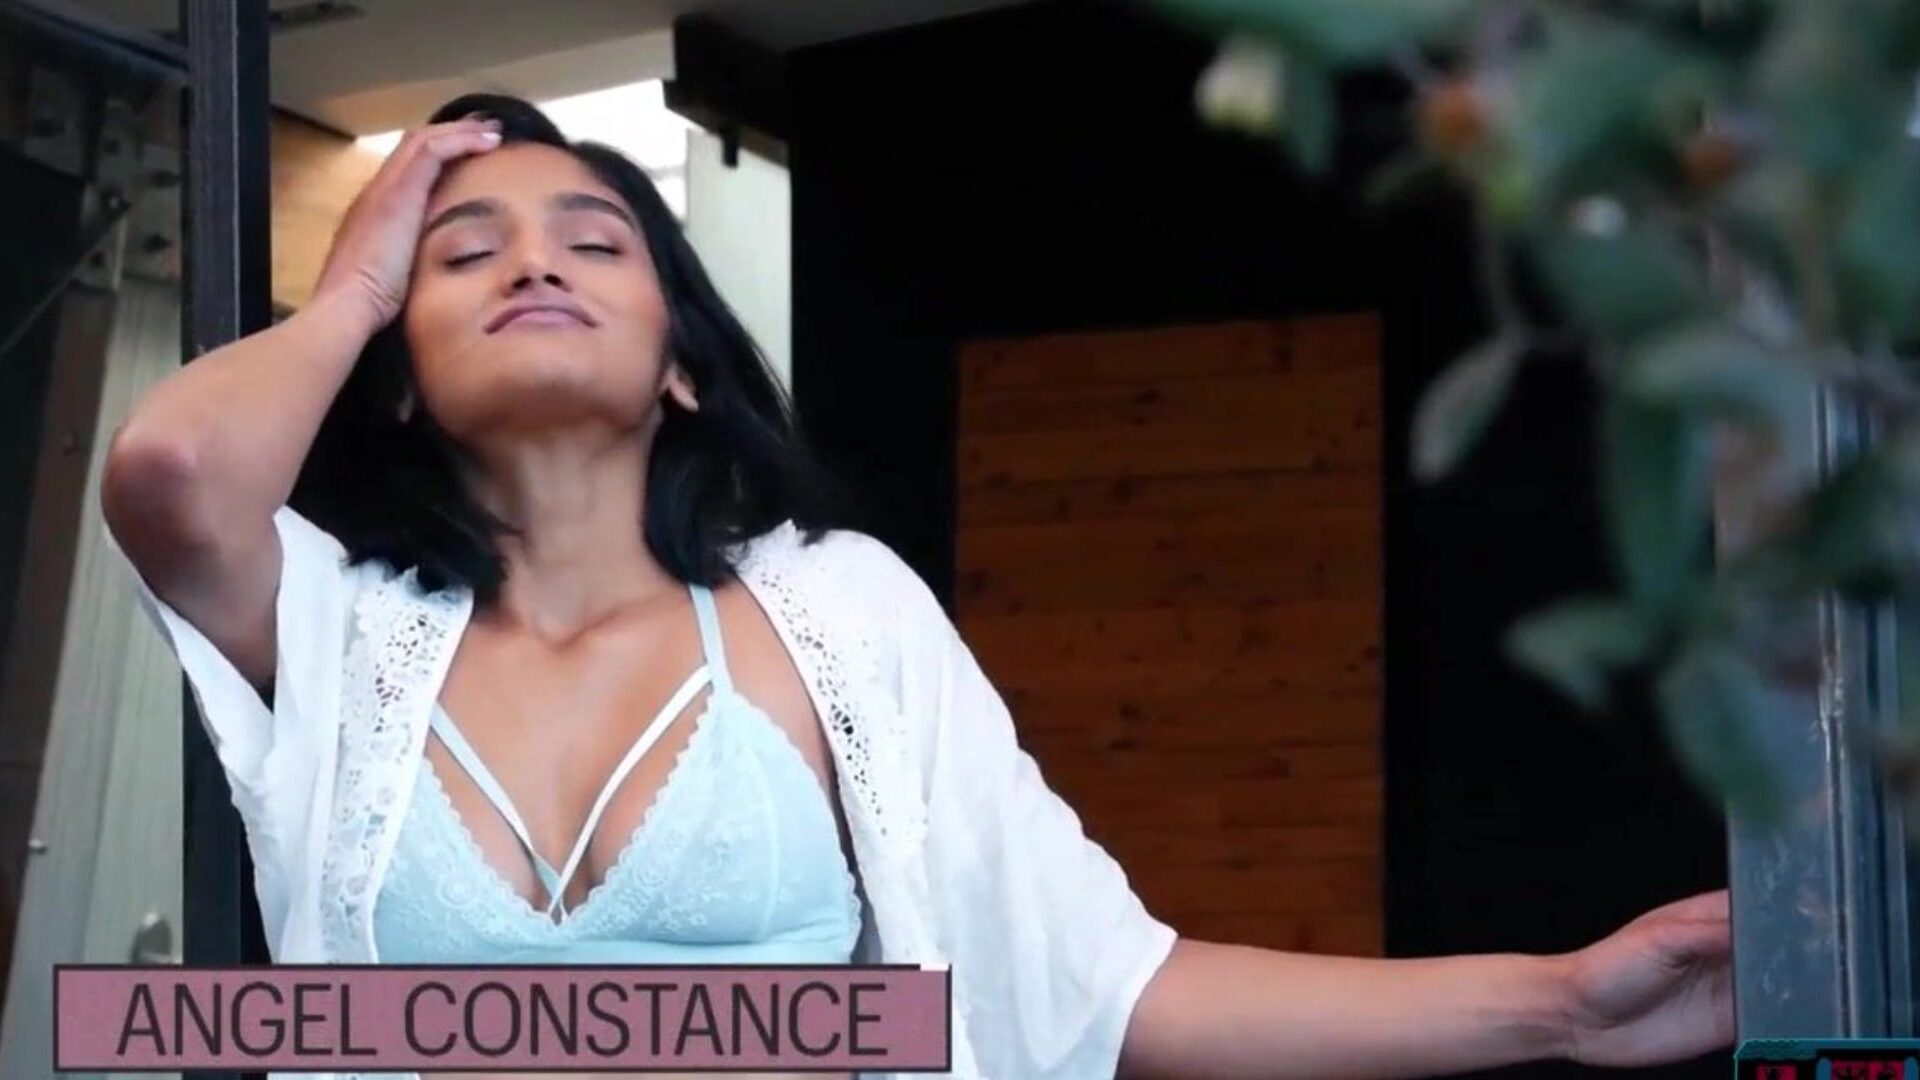 Indian MILF model Angel Constance acquires undressed and shows off her astonishing body